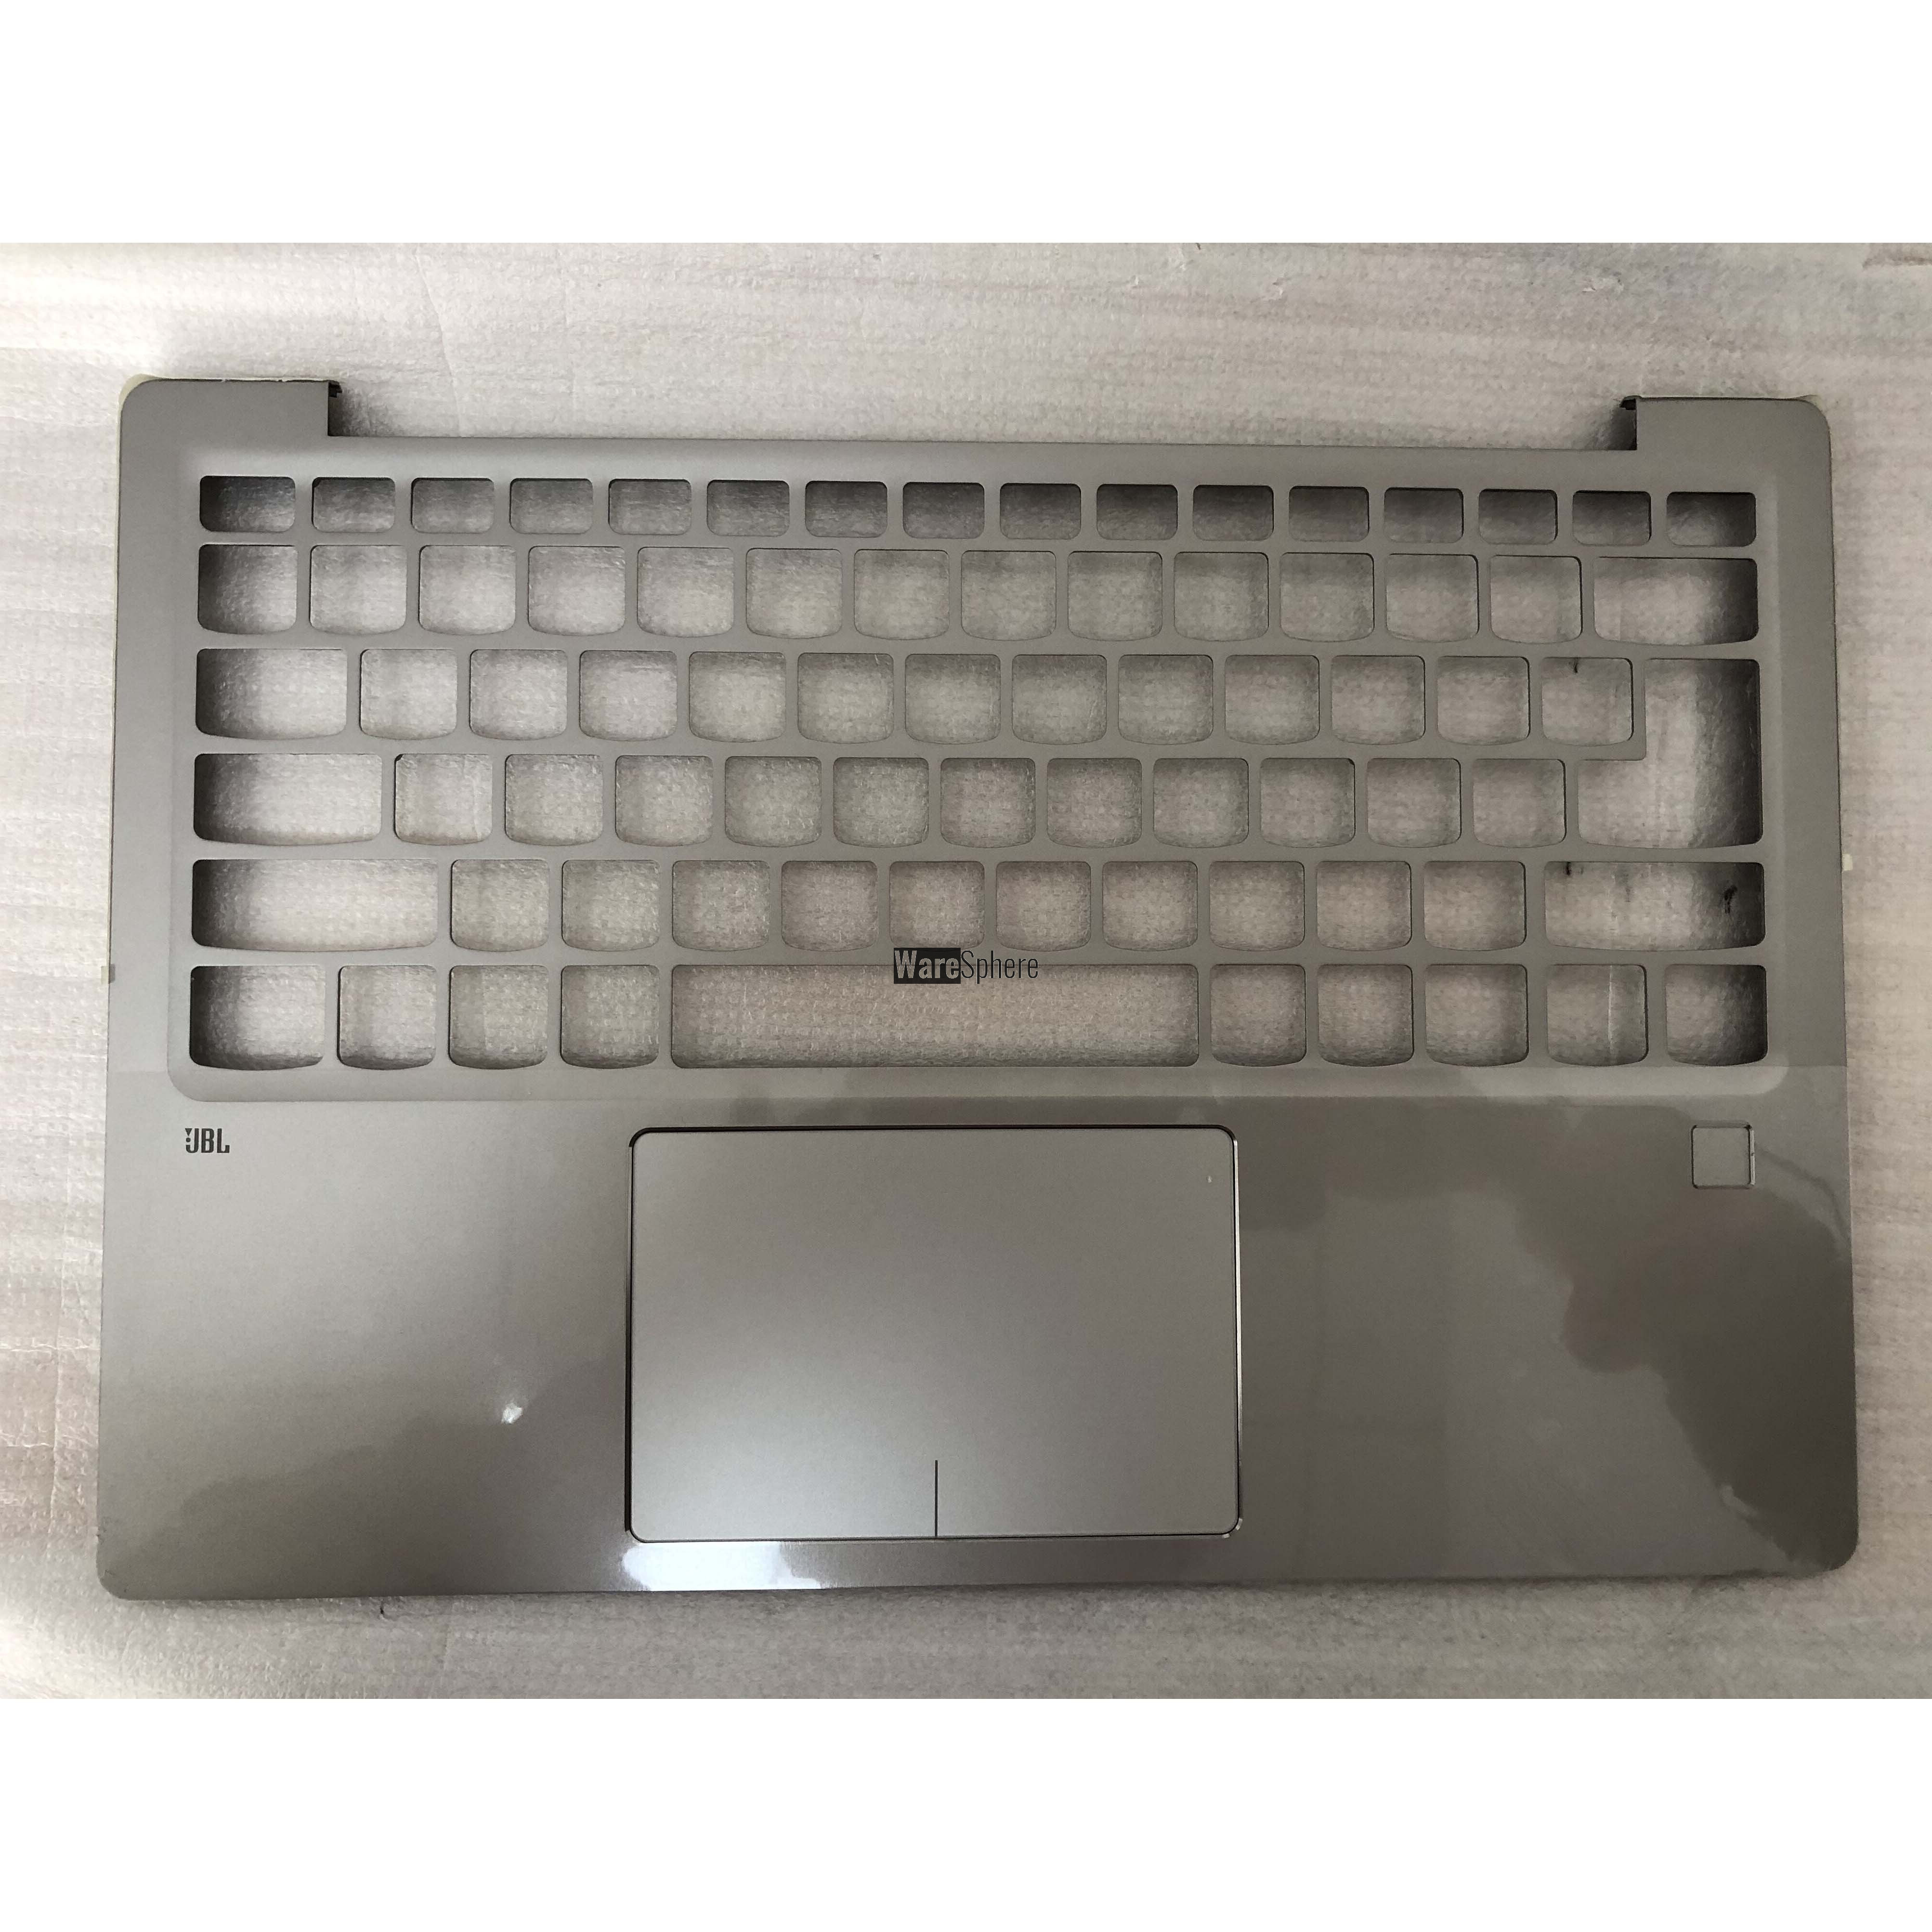 Top Cover Upper Case for Lenovo ideapad 720S-13IKB Palmrest with Touchpad AM168000120 Silver